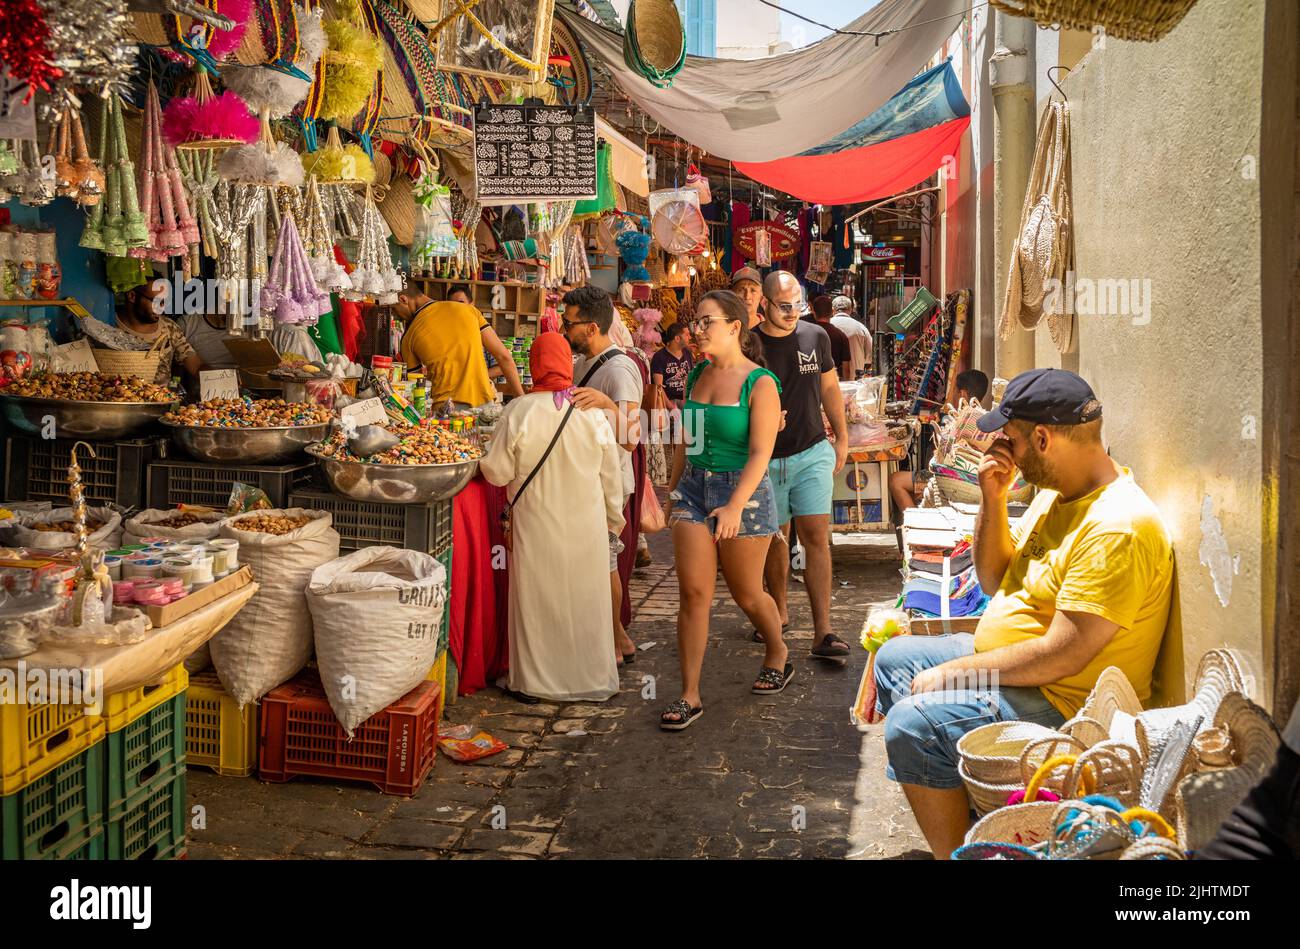 People shop at a sweet stall in the souk at the Medina of Sousse in Tunisia. The ancient medina is a UNESCO world heritage site. Stock Photo